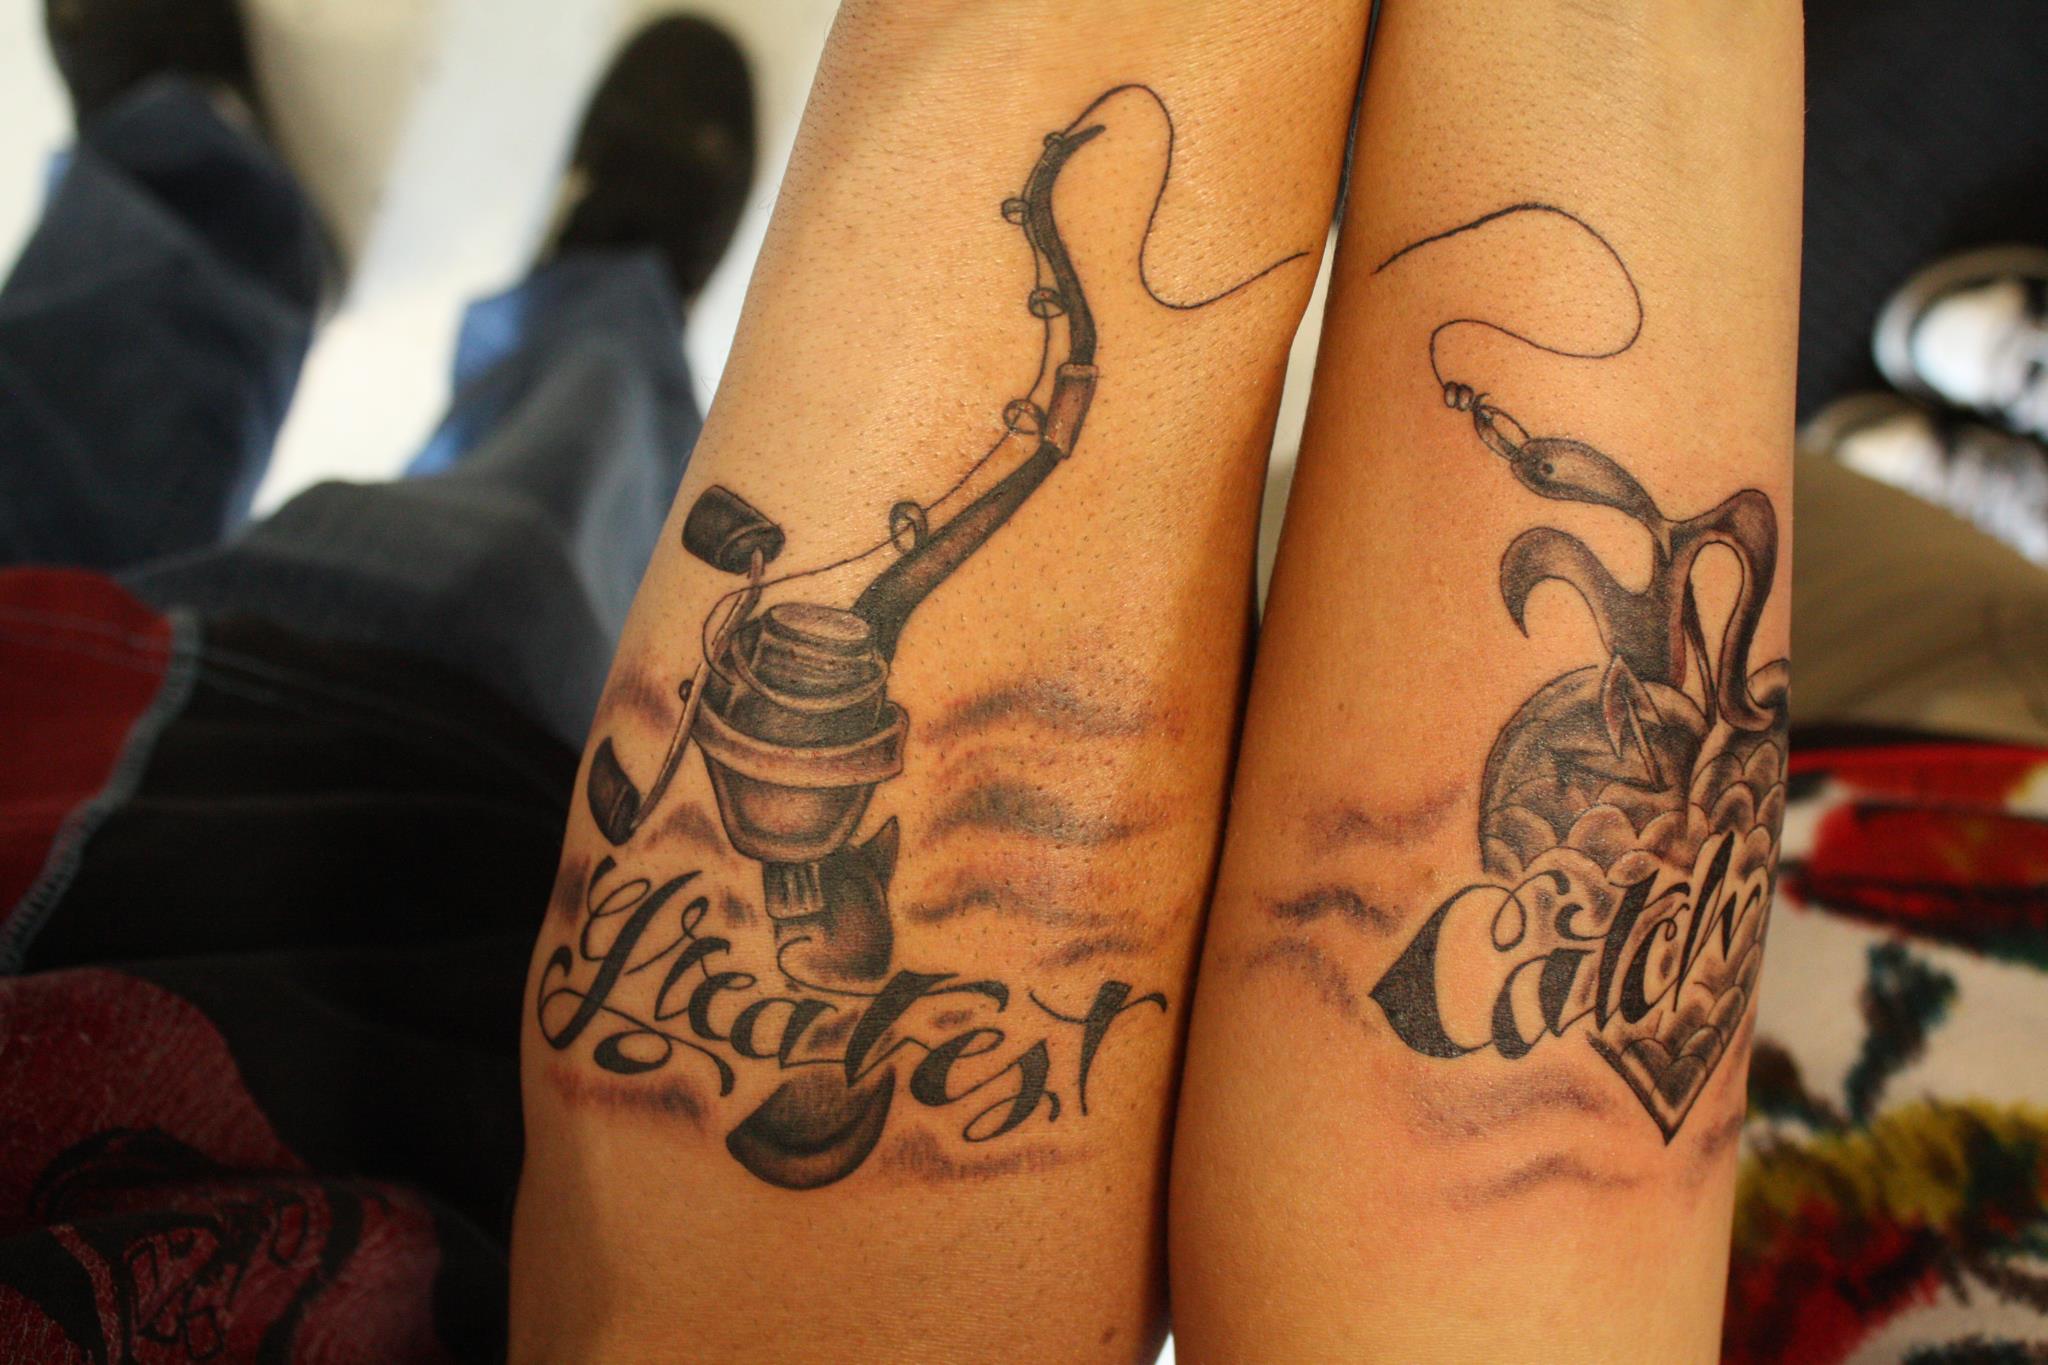 10. Then and Now Tattoo Ideas for Couples - wide 9